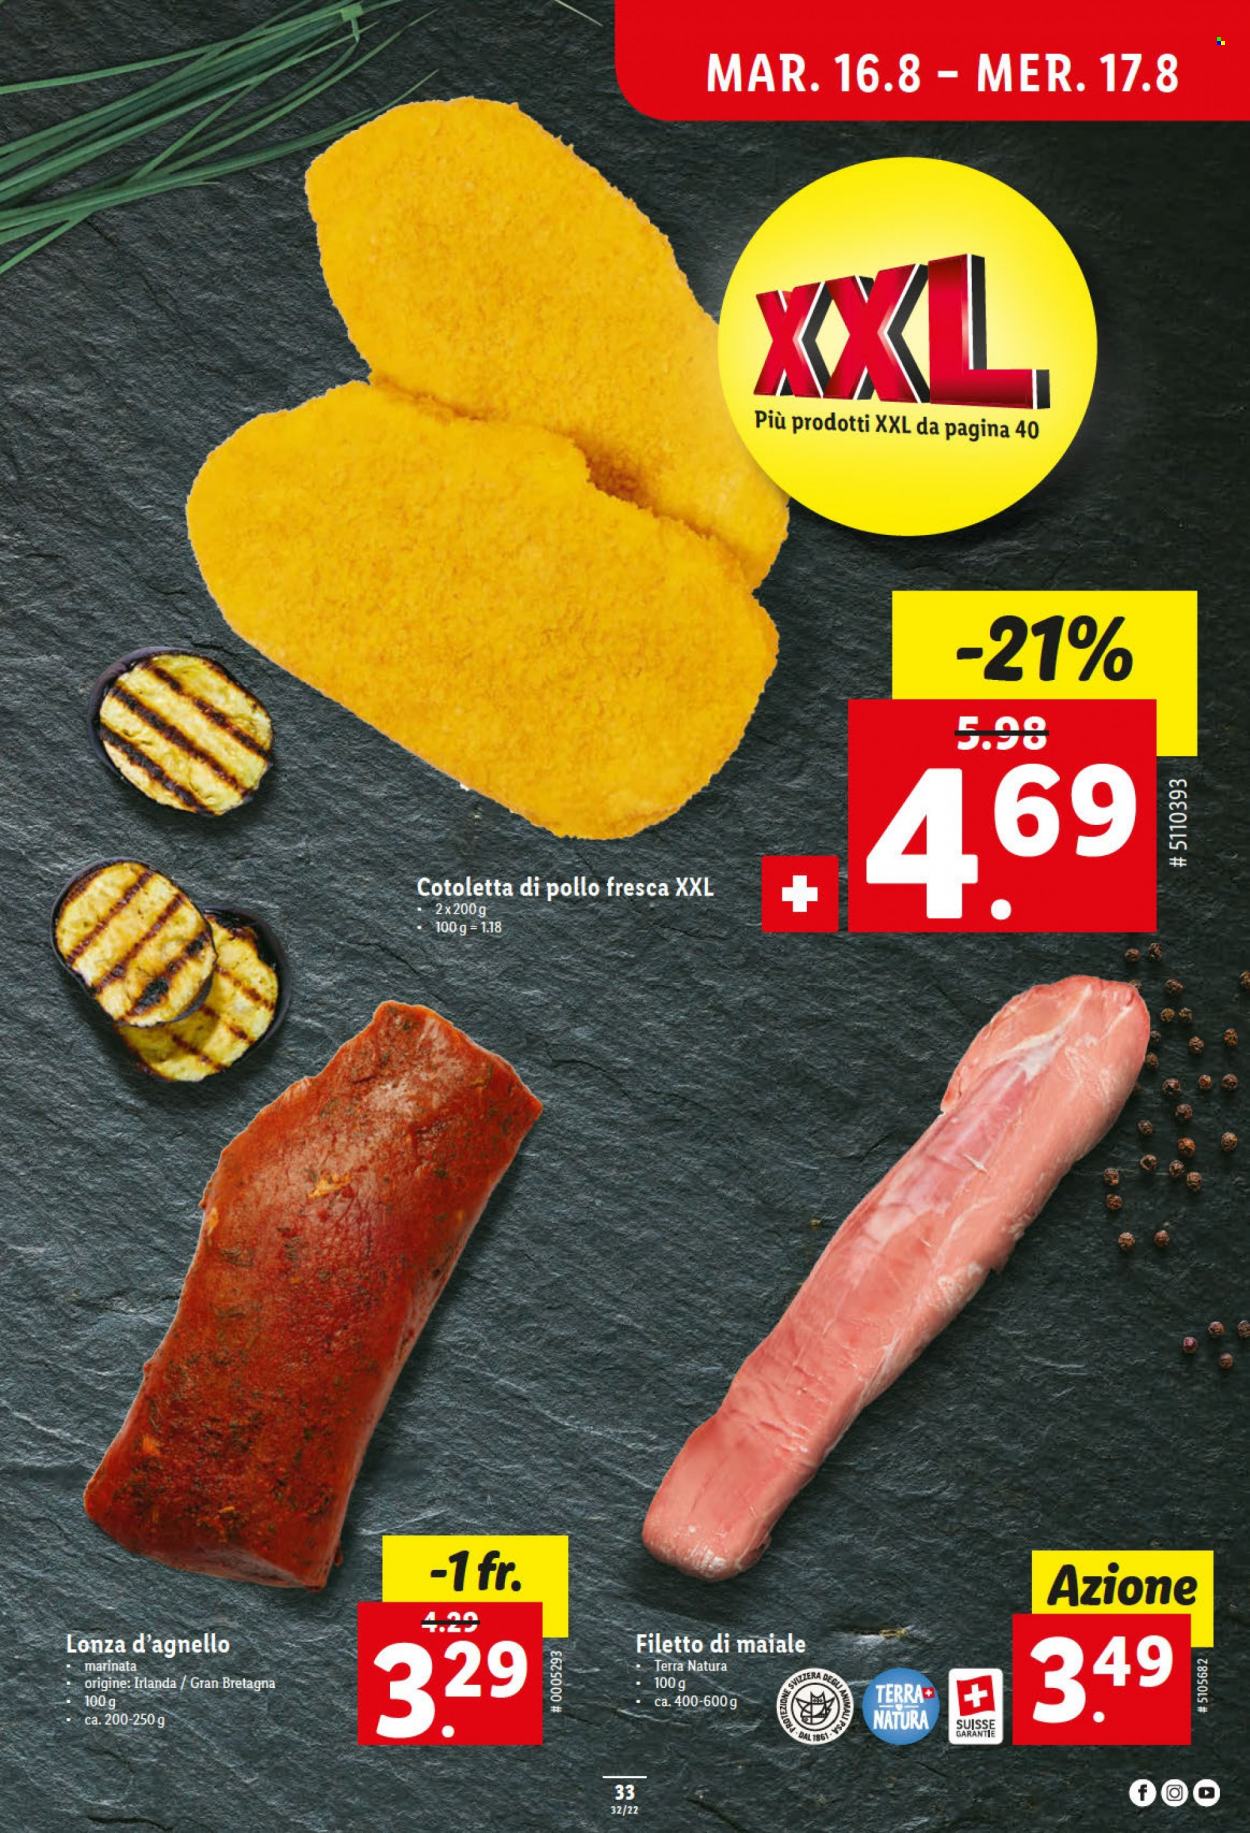 Catalogue Lidl - 11.8.2022 - 17.8.2022. Page 33.